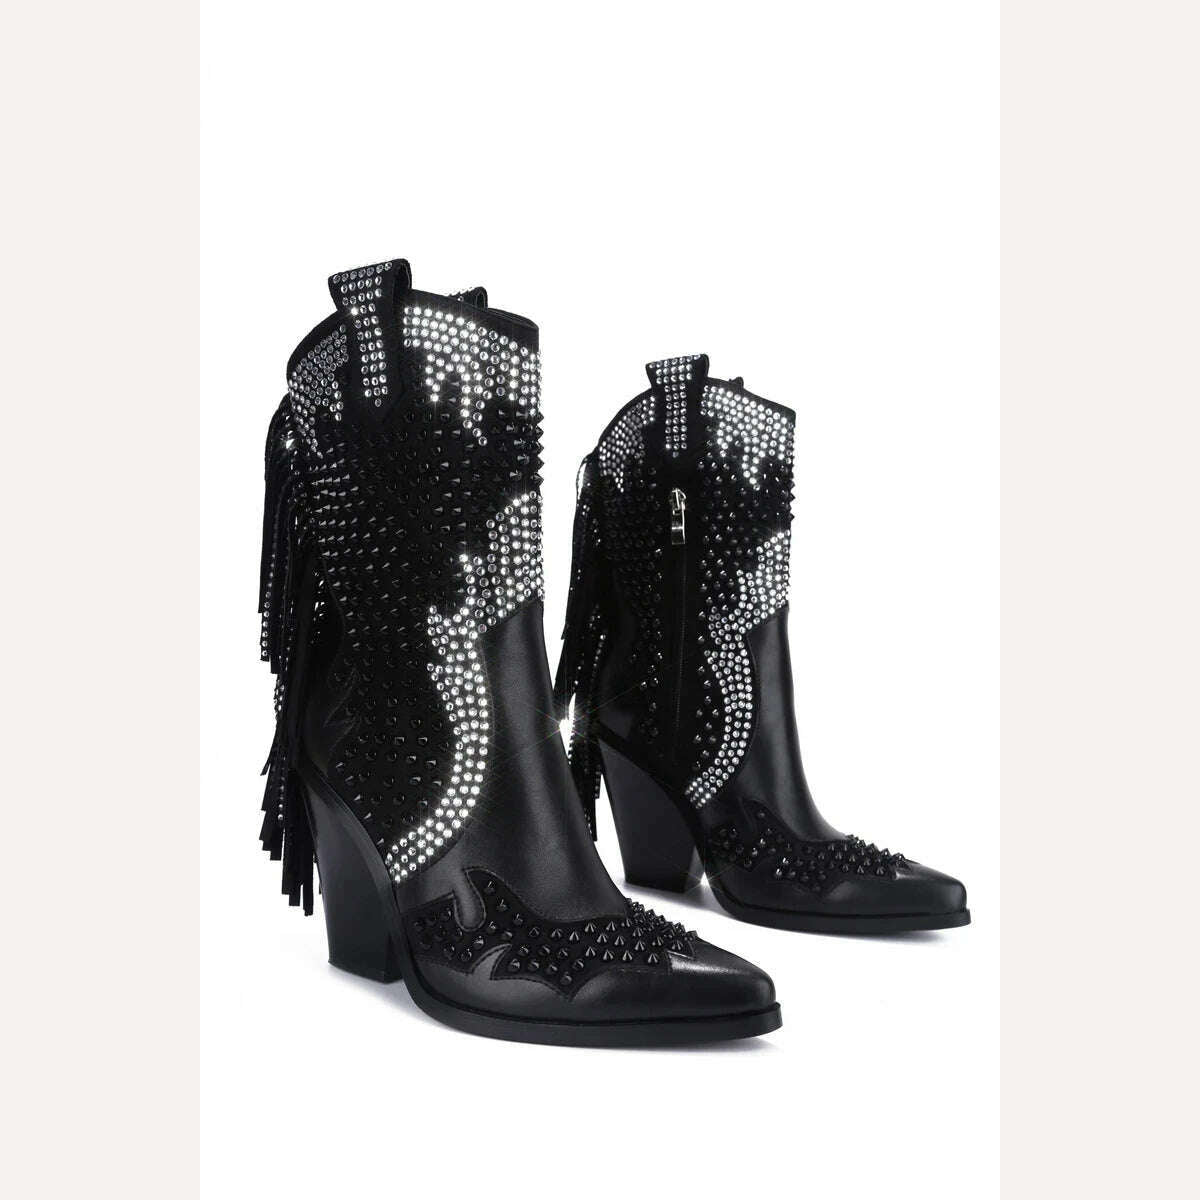 KIMLUD, 2022 Women Blingbling Over The Knee Boots Lady Tassel Long Boots Black Crystal High Heels Shoes Chelsea Boots Women&#39;s Stage Boot, as pic 1 / 35, KIMLUD Women's Clothes